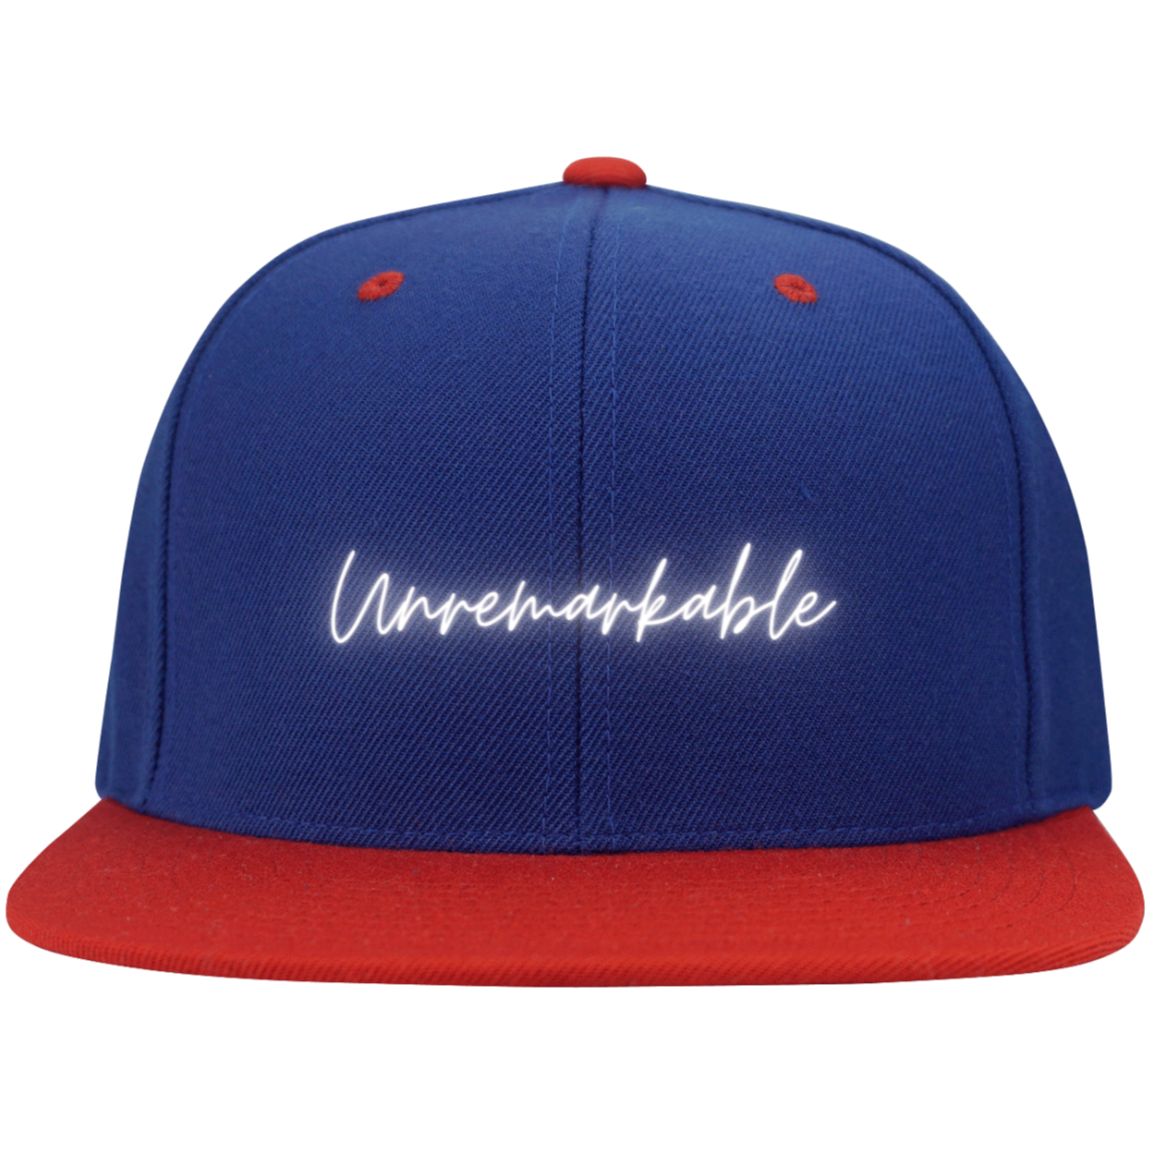 Unremarkable Embroidered Flat Bill High-Profile Snapback Hat